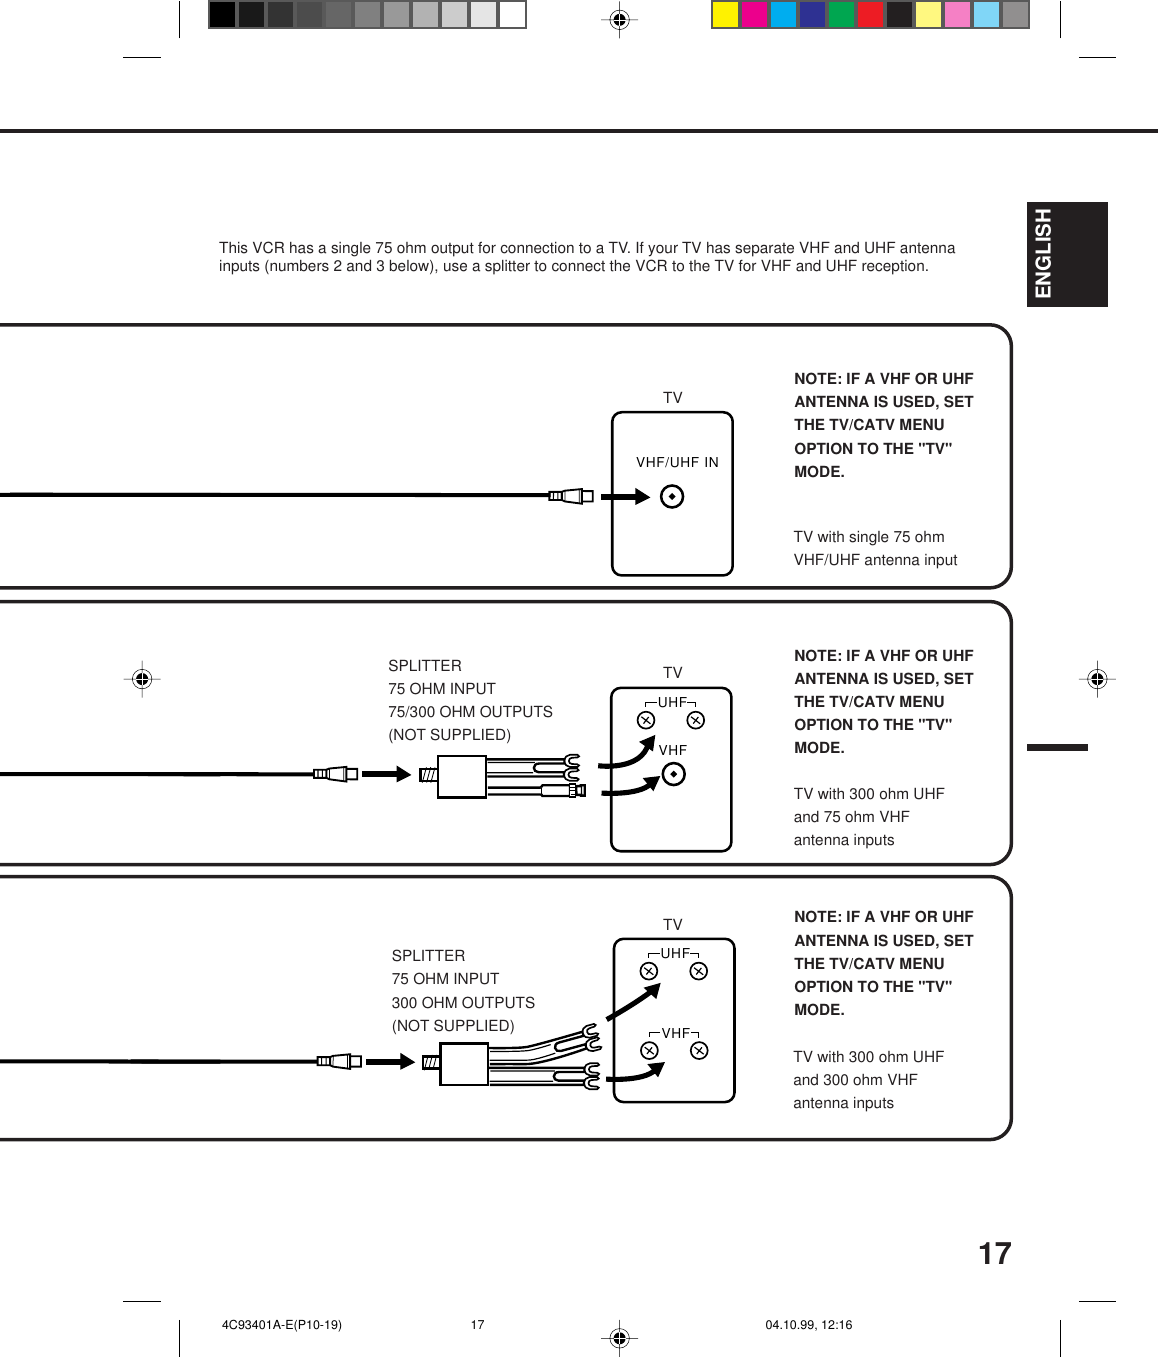 17ENGLISHNOTE: IF A VHF OR UHFANTENNA IS USED, SETTHE TV/CATV MENUOPTION TO THE &quot;TV&quot;MODE.NOTE: IF A VHF OR UHFANTENNA IS USED, SETTHE TV/CATV MENUOPTION TO THE &quot;TV&quot;MODE.UHFVHFUHFVHFVHF/UHF INThis VCR has a single 75 ohm output for connection to a TV. If your TV has separate VHF and UHF antennainputs (numbers 2 and 3 below), use a splitter to connect the VCR to the TV for VHF and UHF reception.NOTE: IF A VHF OR UHFANTENNA IS USED, SETTHE TV/CATV MENUOPTION TO THE &quot;TV&quot;MODE.TV with single 75 ohmVHF/UHF antenna inputTV with 300 ohm UHFand 75 ohm VHFantenna inputsTV with 300 ohm UHFand 300 ohm VHFantenna inputsSPLITTER75 OHM INPUT75/300 OHM OUTPUTS(NOT SUPPLIED)SPLITTER75 OHM INPUT300 OHM OUTPUTS(NOT SUPPLIED)TVTVTV    4C93401A-E(P10-19) 04.10.99, 12:1617